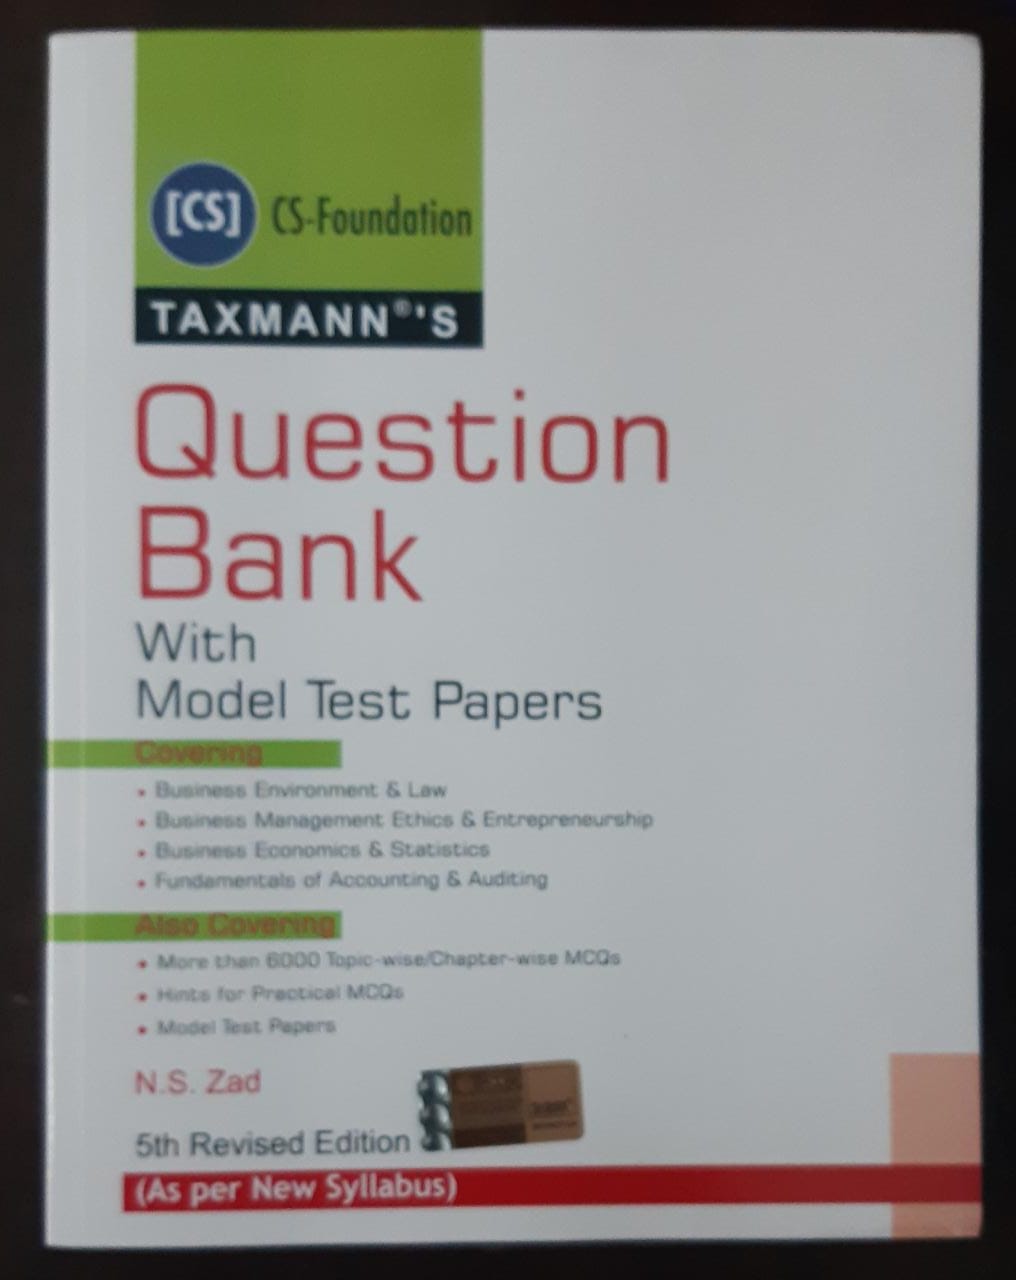 TAXMANN,S QUESTION BANK WITH MODEL TEST PAPERS 5TH REVISED EDITION